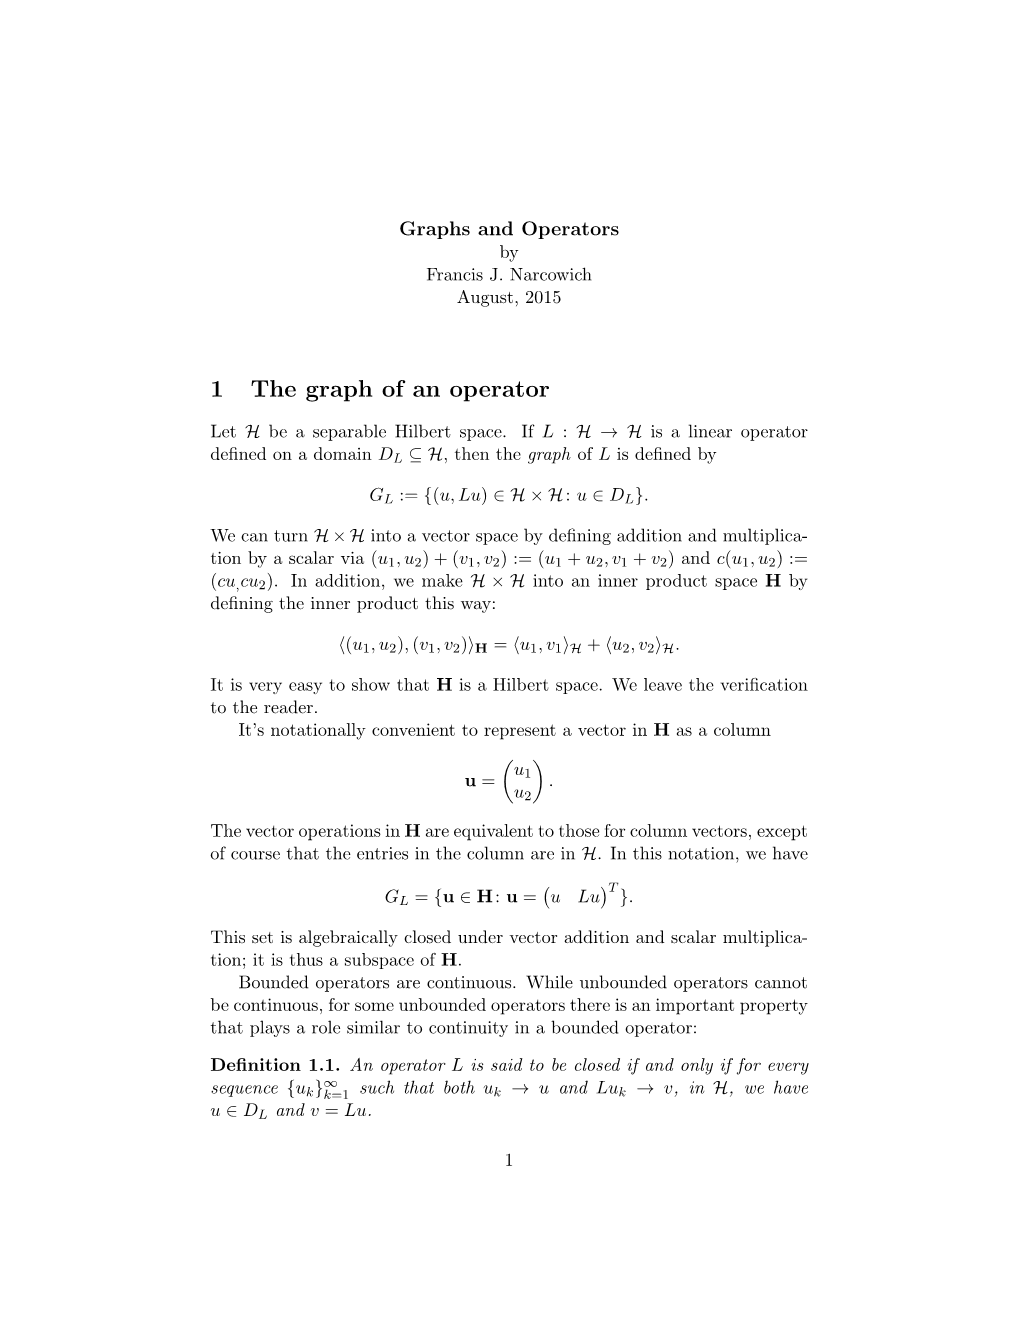 Graphs and Operators by Francis J